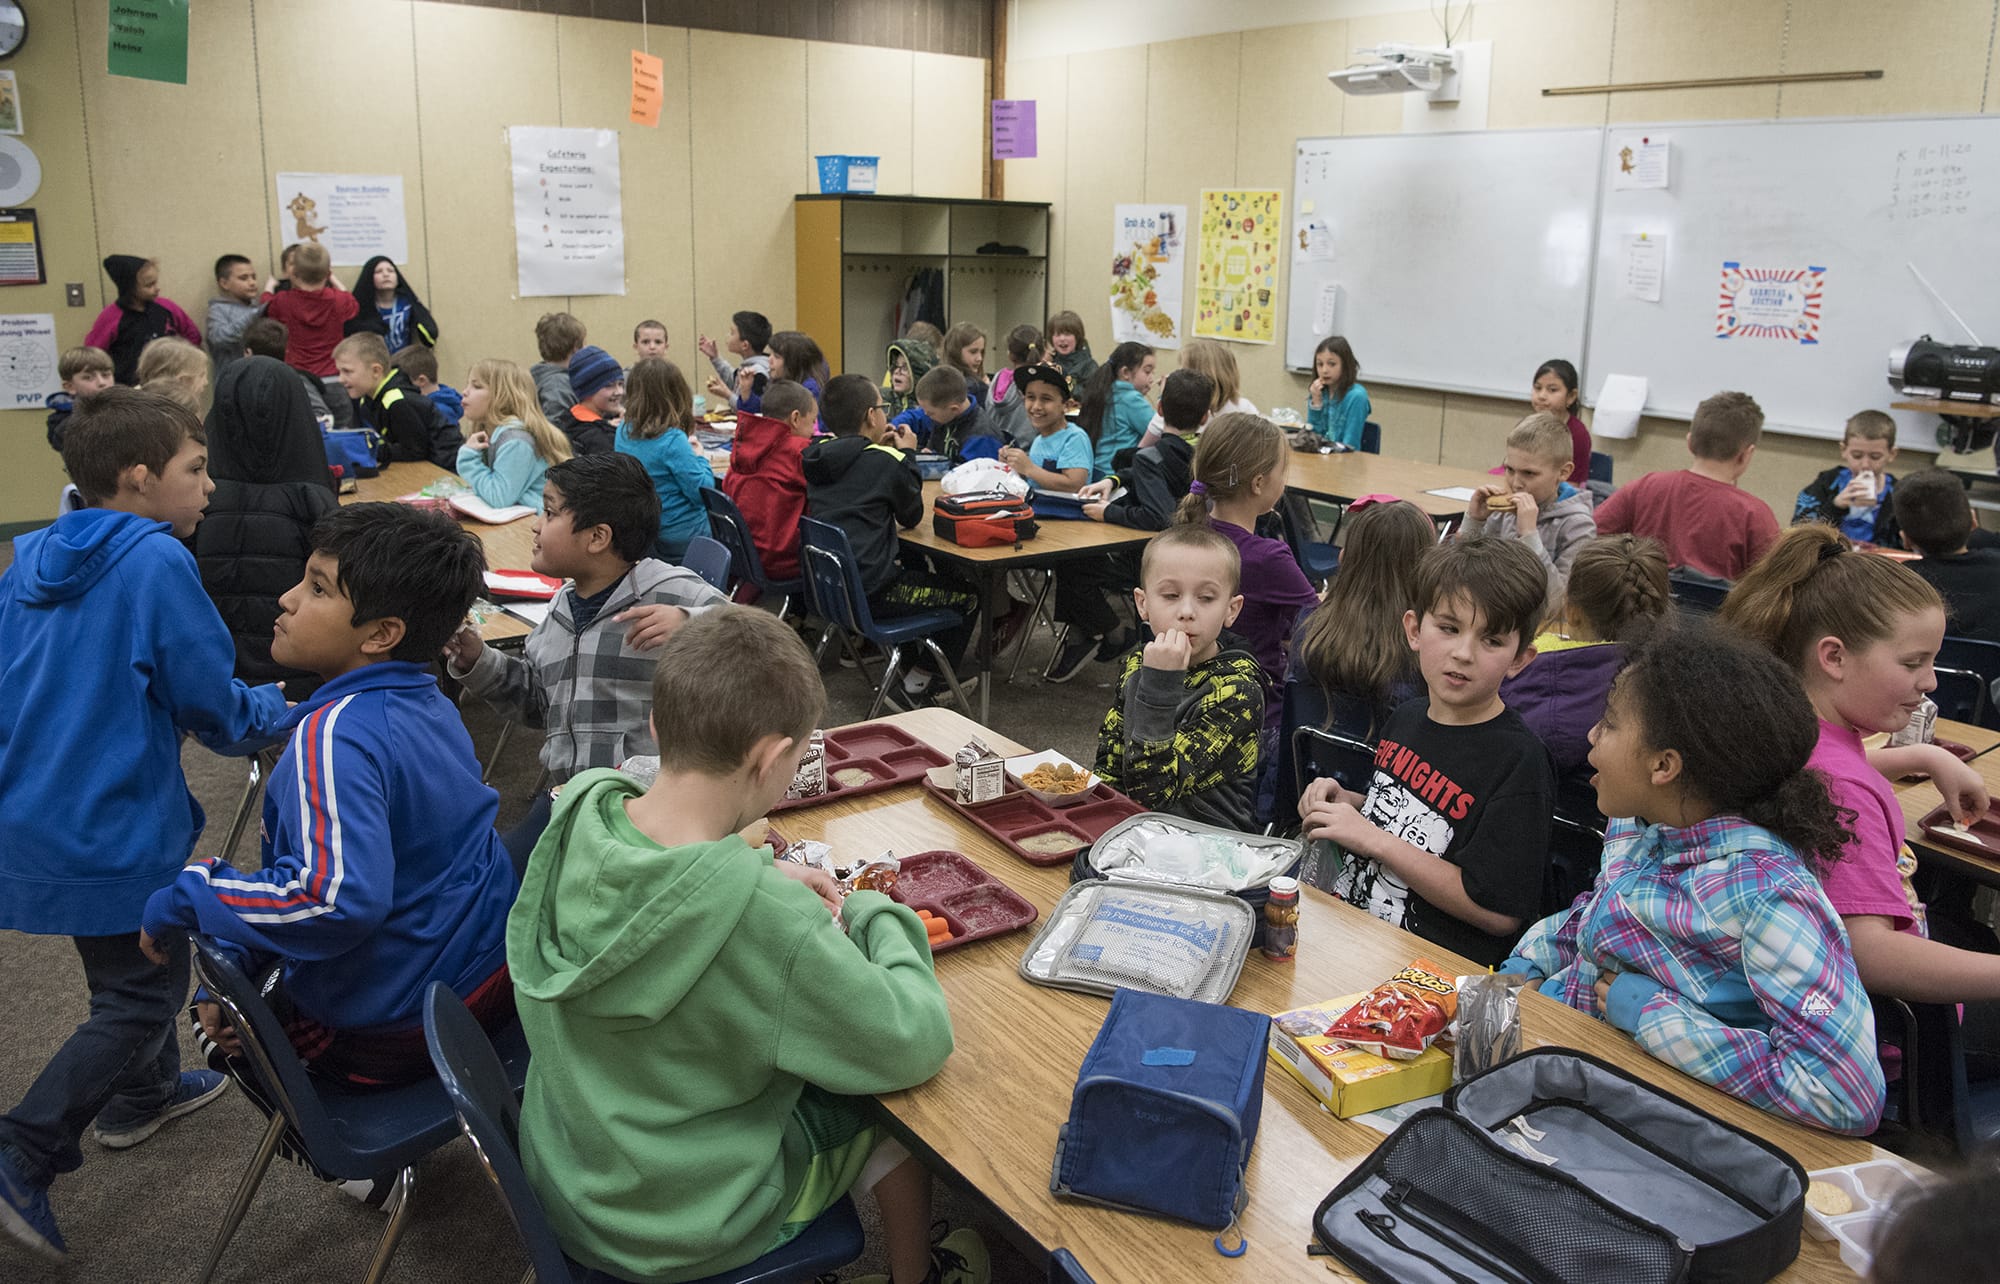 Third-graders eat lunch in a crowded classroom at Pleasant Valley Primary in March. The school is among those the Battle Ground Public Schools has been hoping to replace with a bond measure.